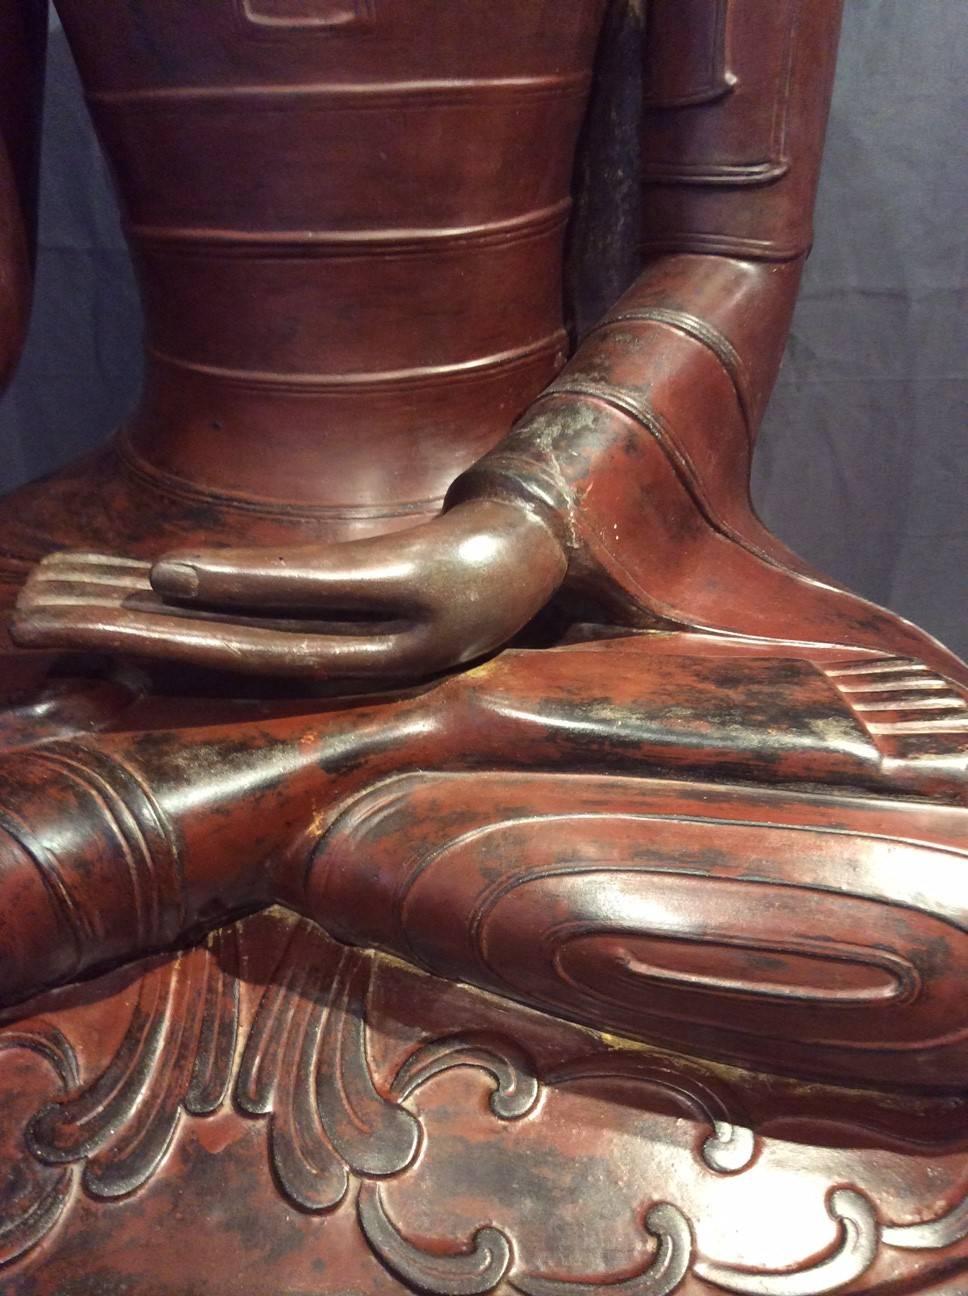 Burmese Huge Buddha Statue in Lacquer from the Region of Shan, Burma